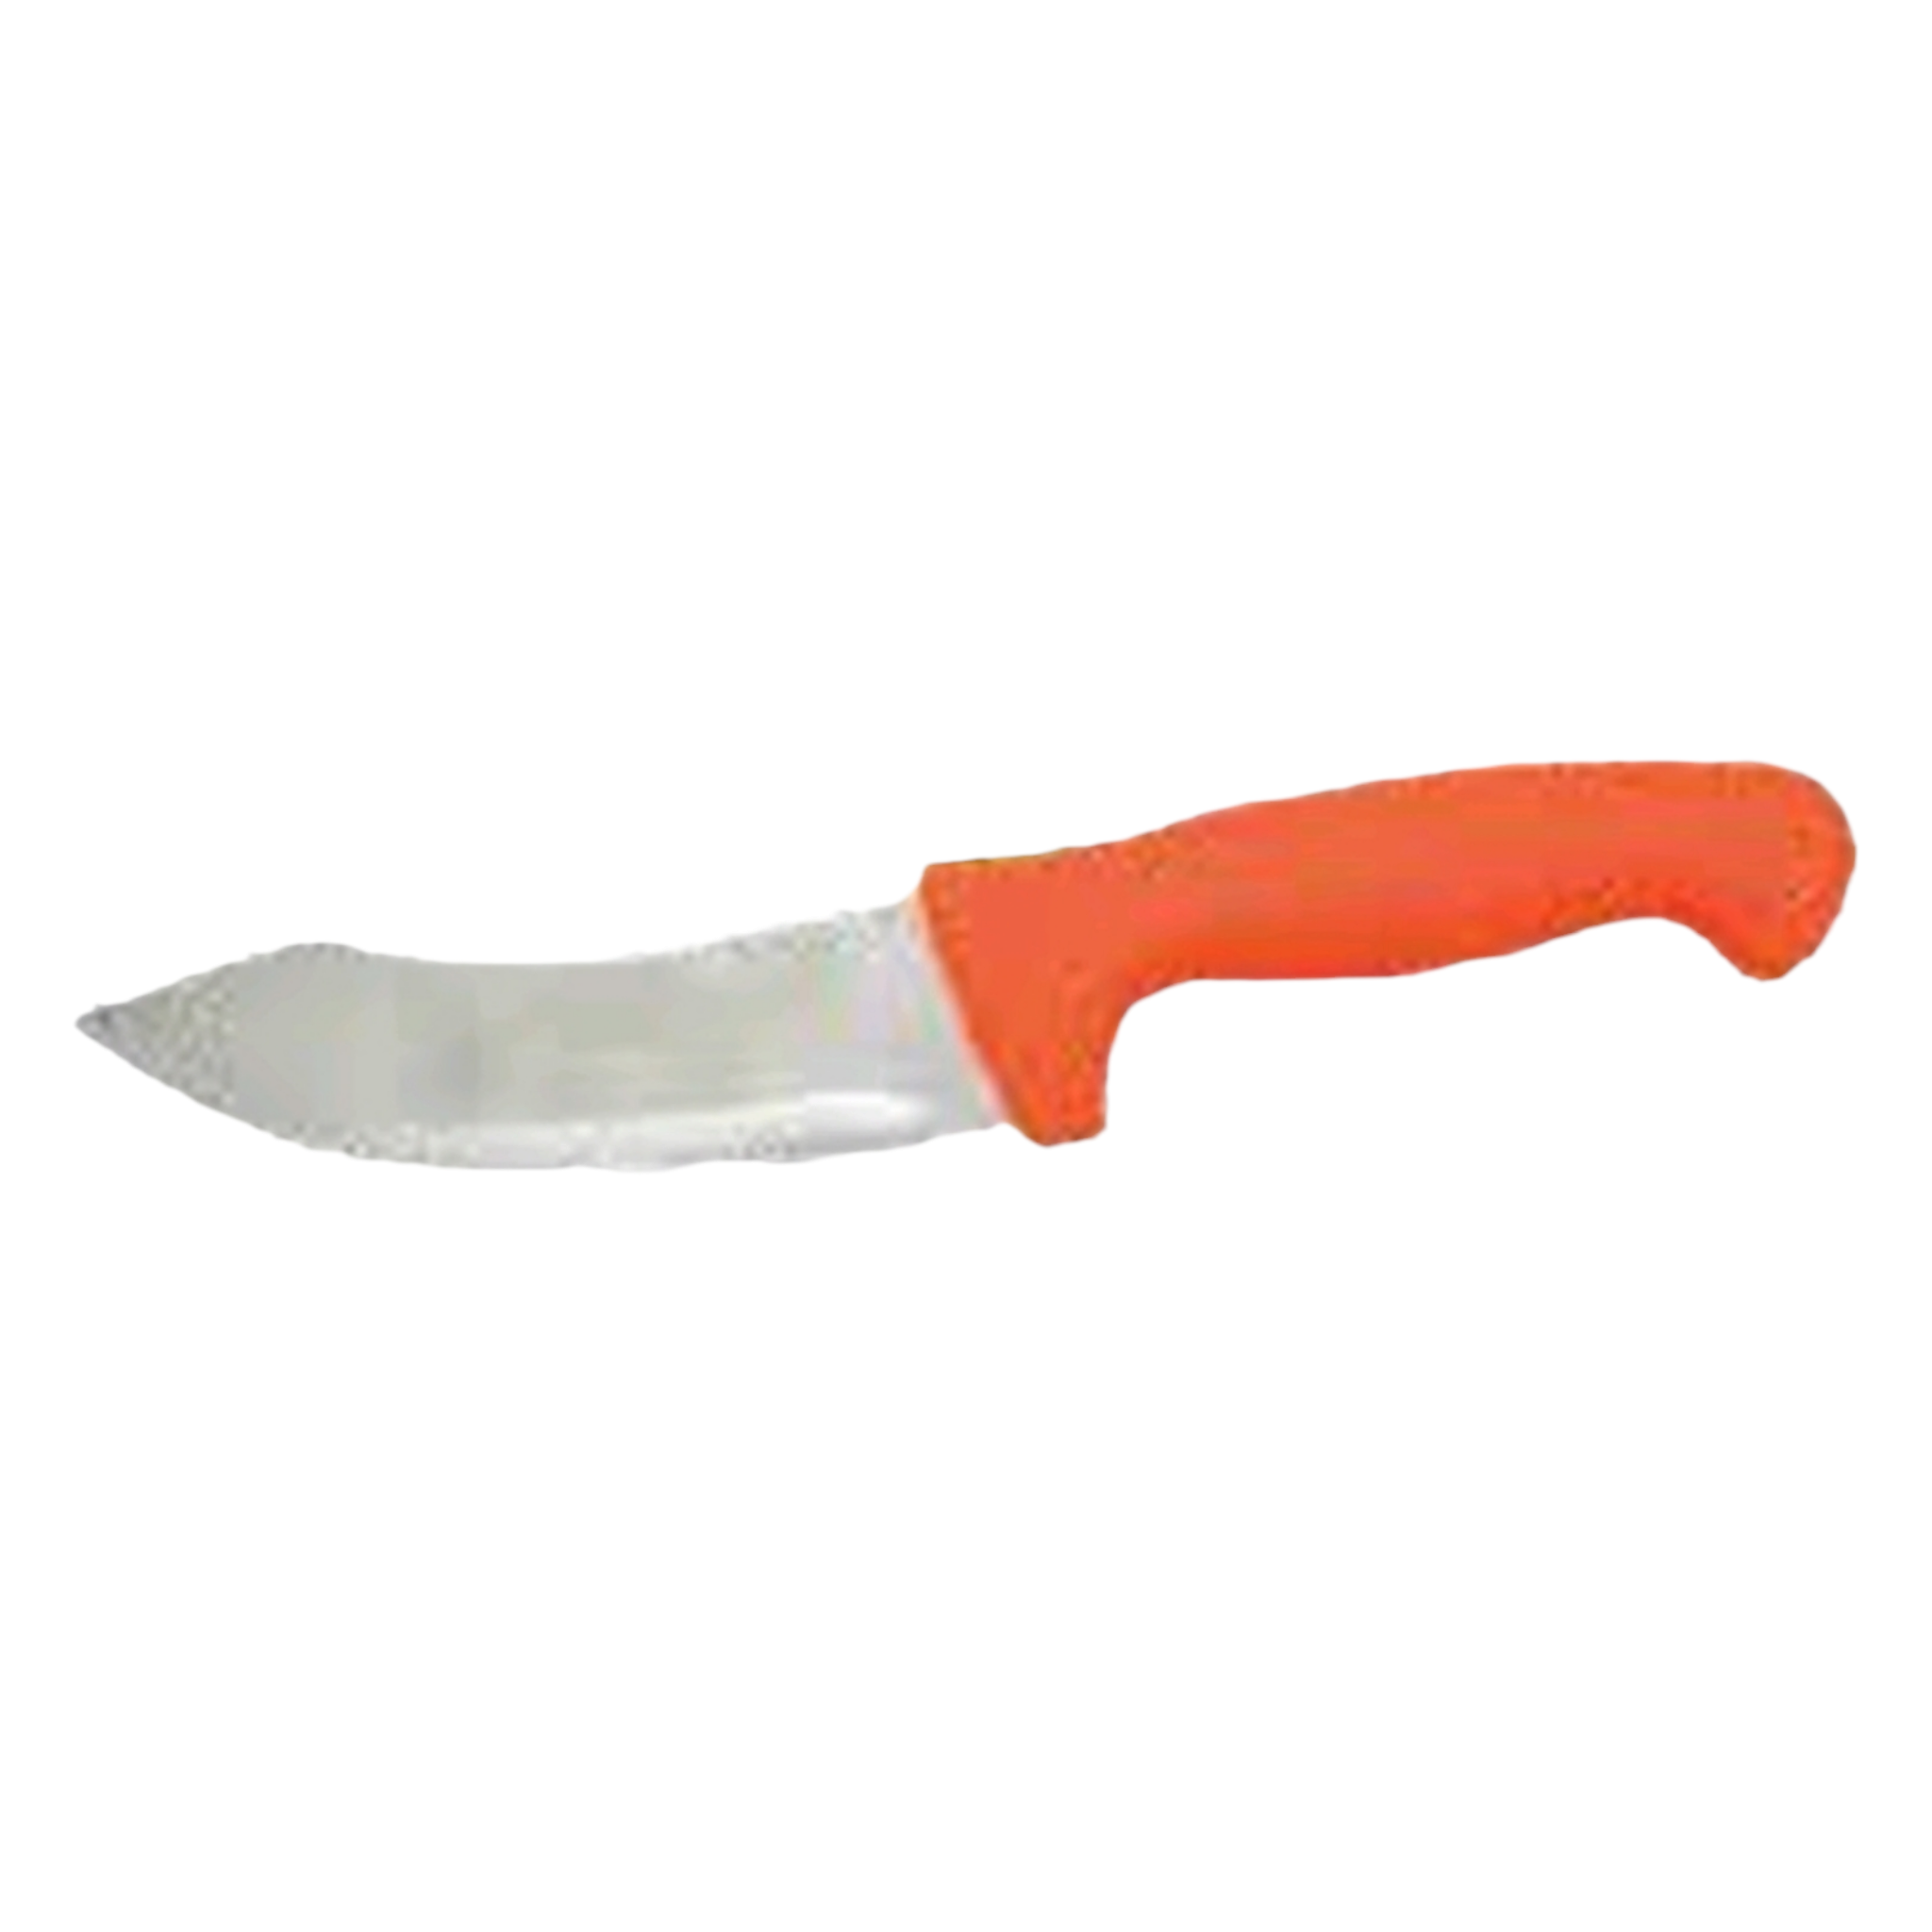 Kitchen Knife Stainless Steel 6Inch 15cm KN0267-6